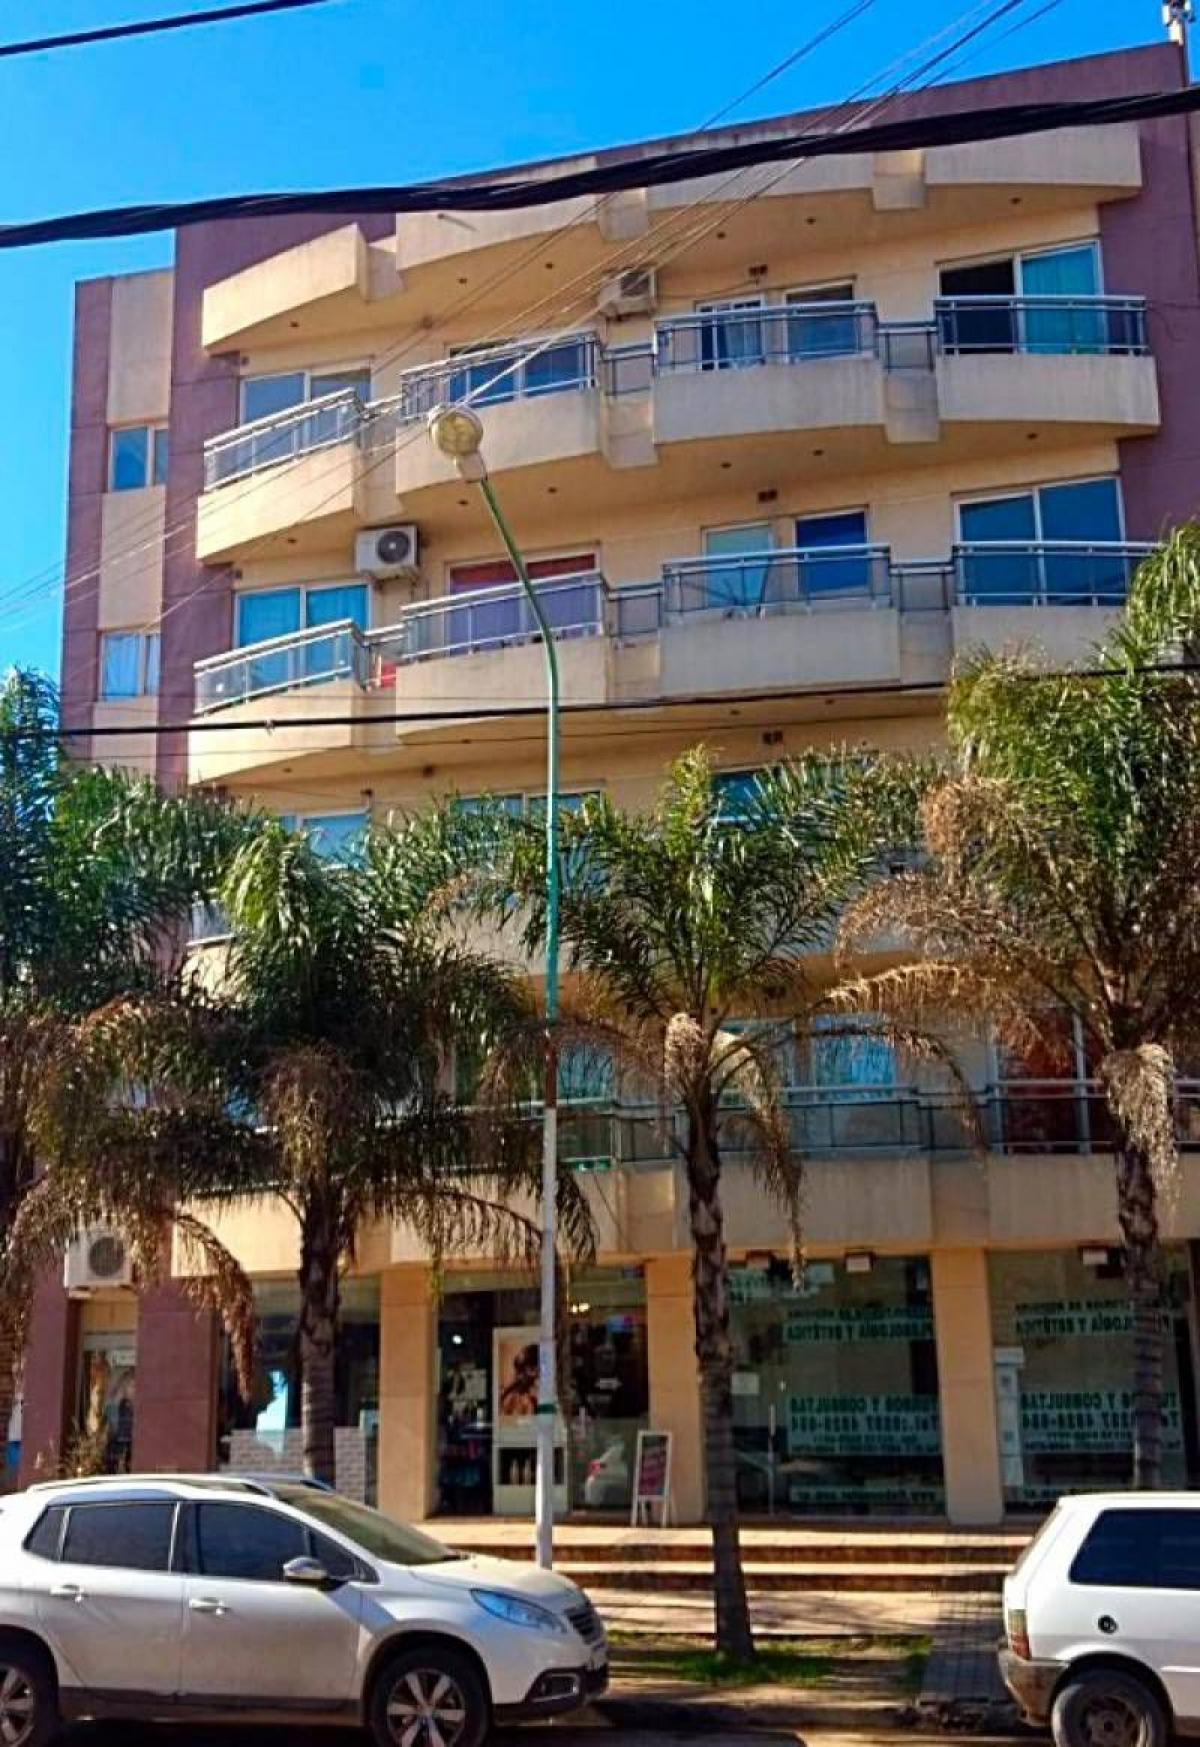 Picture of Apartment For Sale in Moreno, Buenos Aires, Argentina